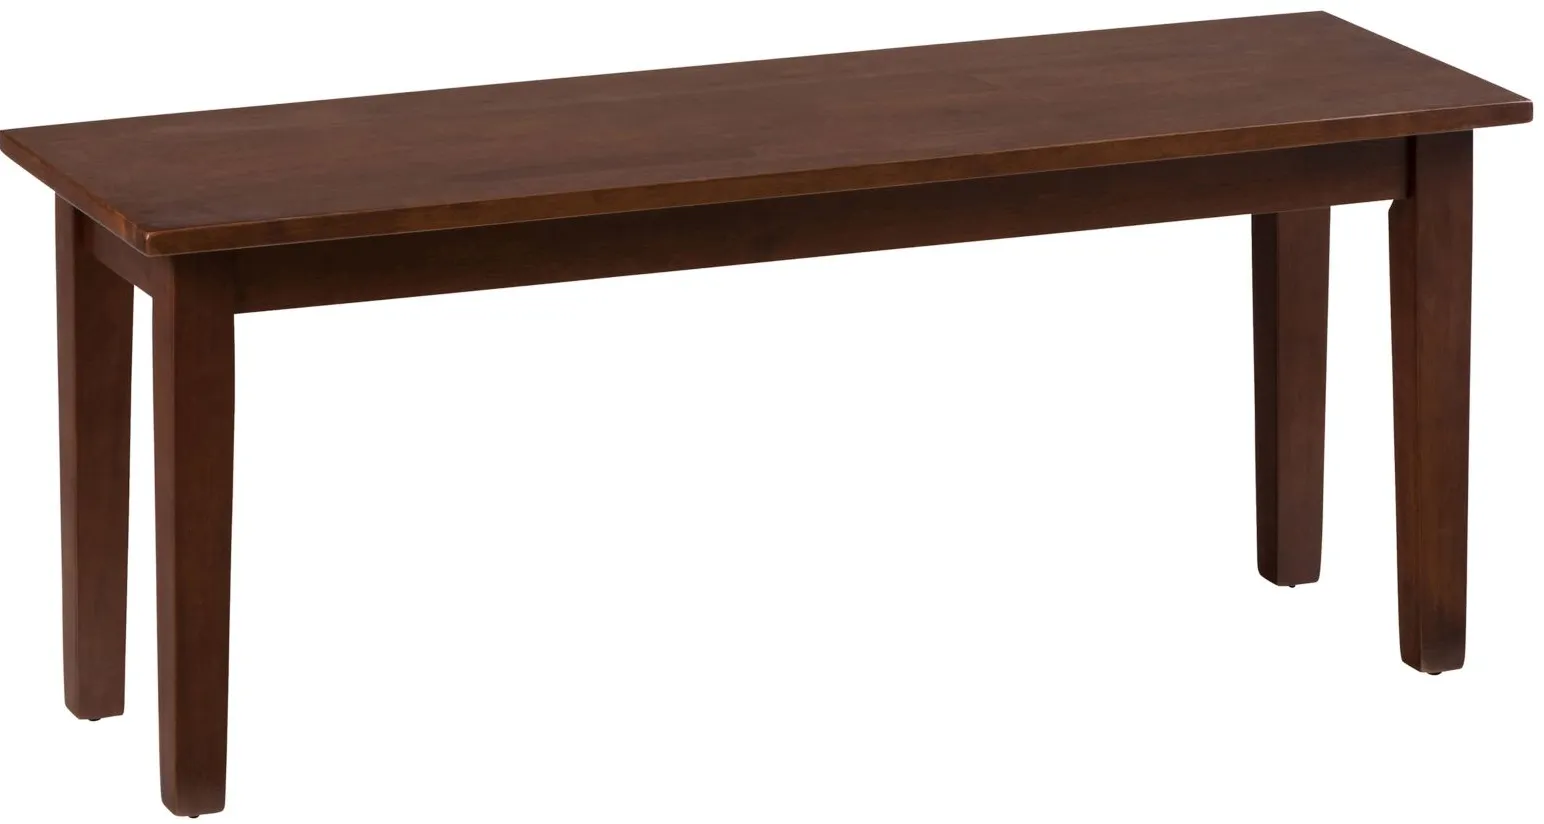 Simplicity Dining Bench in Caramel by Jofran